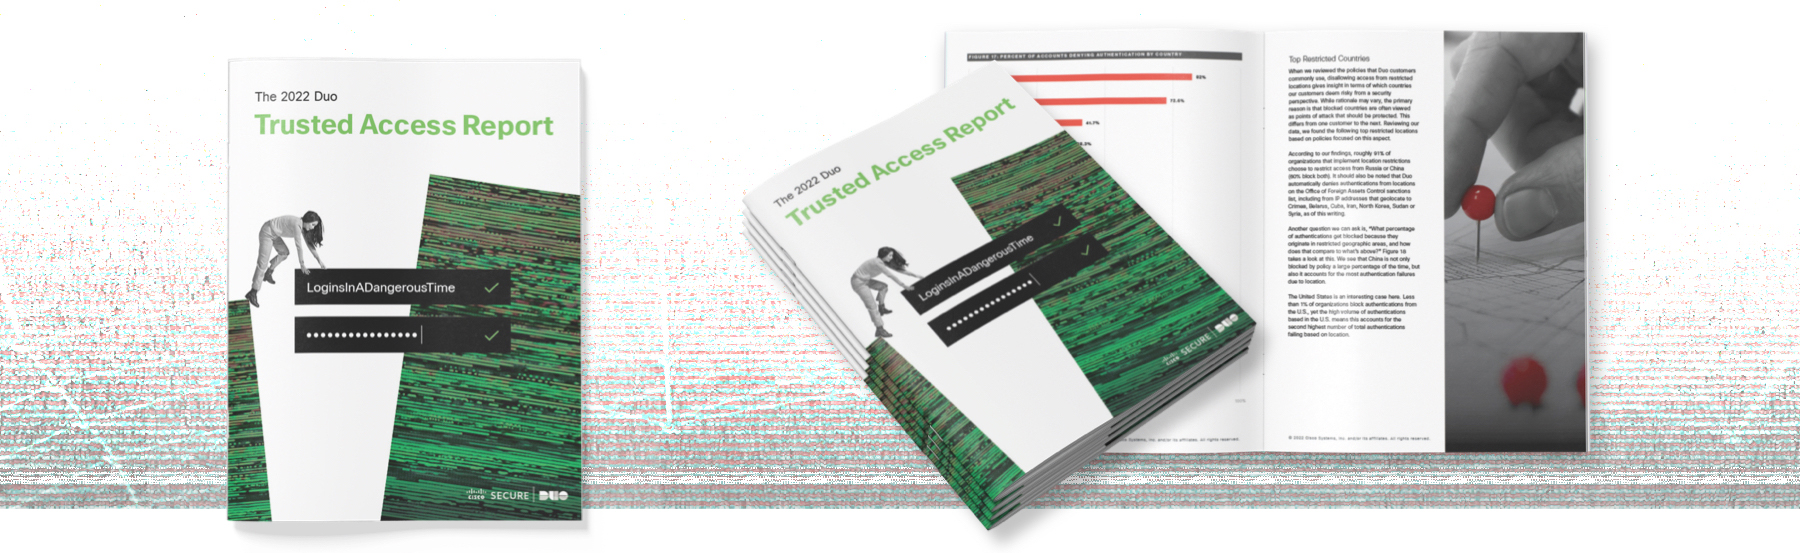 Cover of The 2021 Duo Trusted Access Report and the report open to a page titled Democratizing Security.